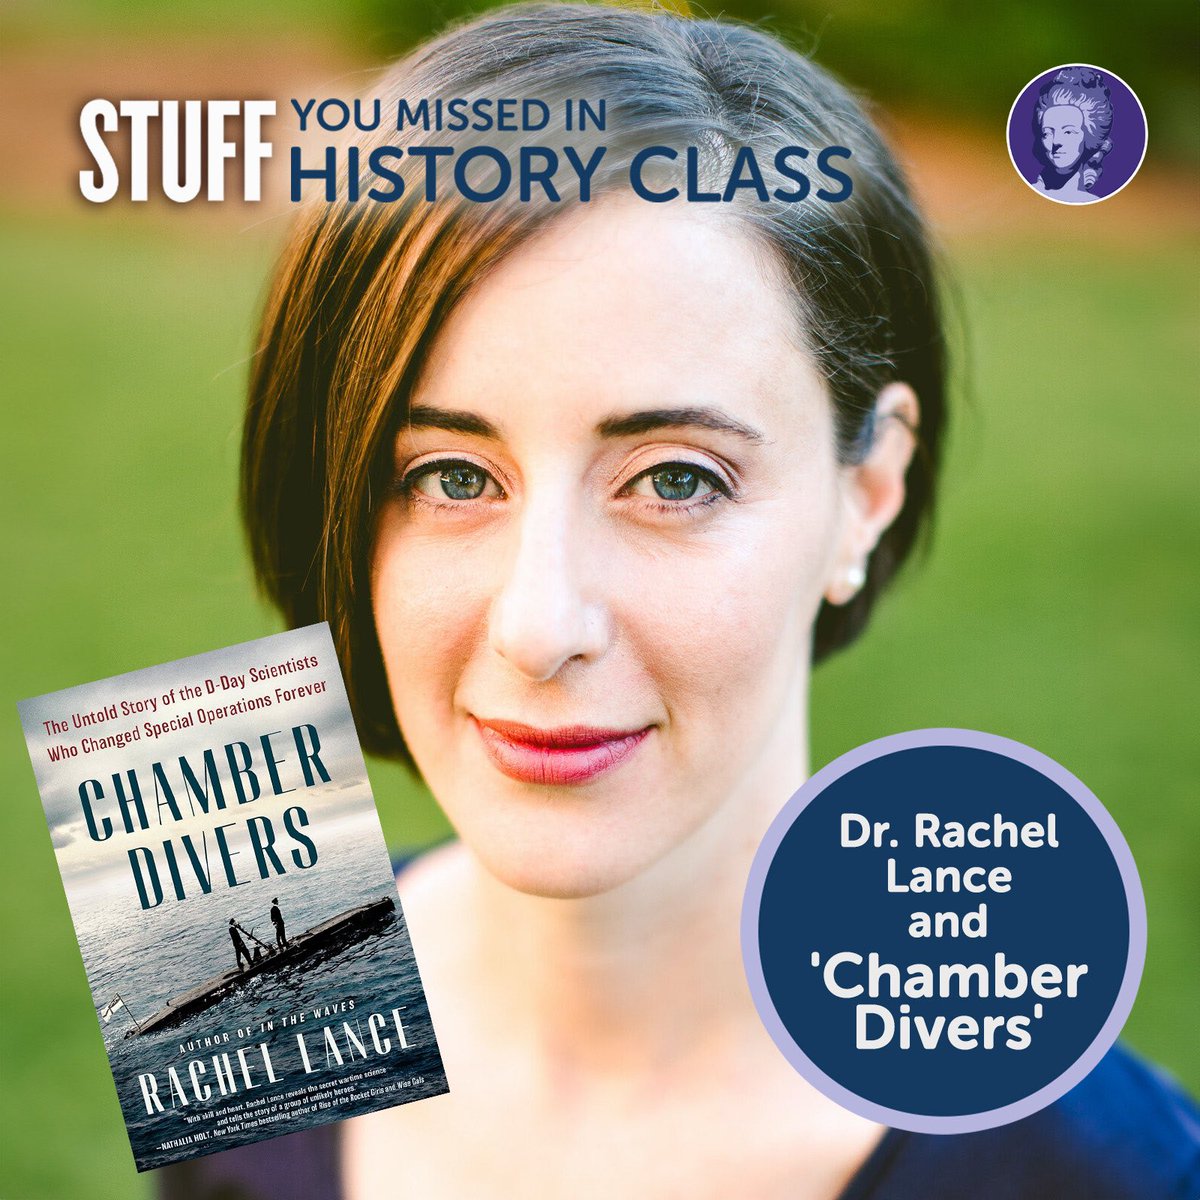 Holly talks with previous podcast guest Dr. Rachel Lance about her new book 'Chamber Divers,' which details the WWII research that advanced underwater science. 

Listen here: omny.fm/shows/stuff-yo…